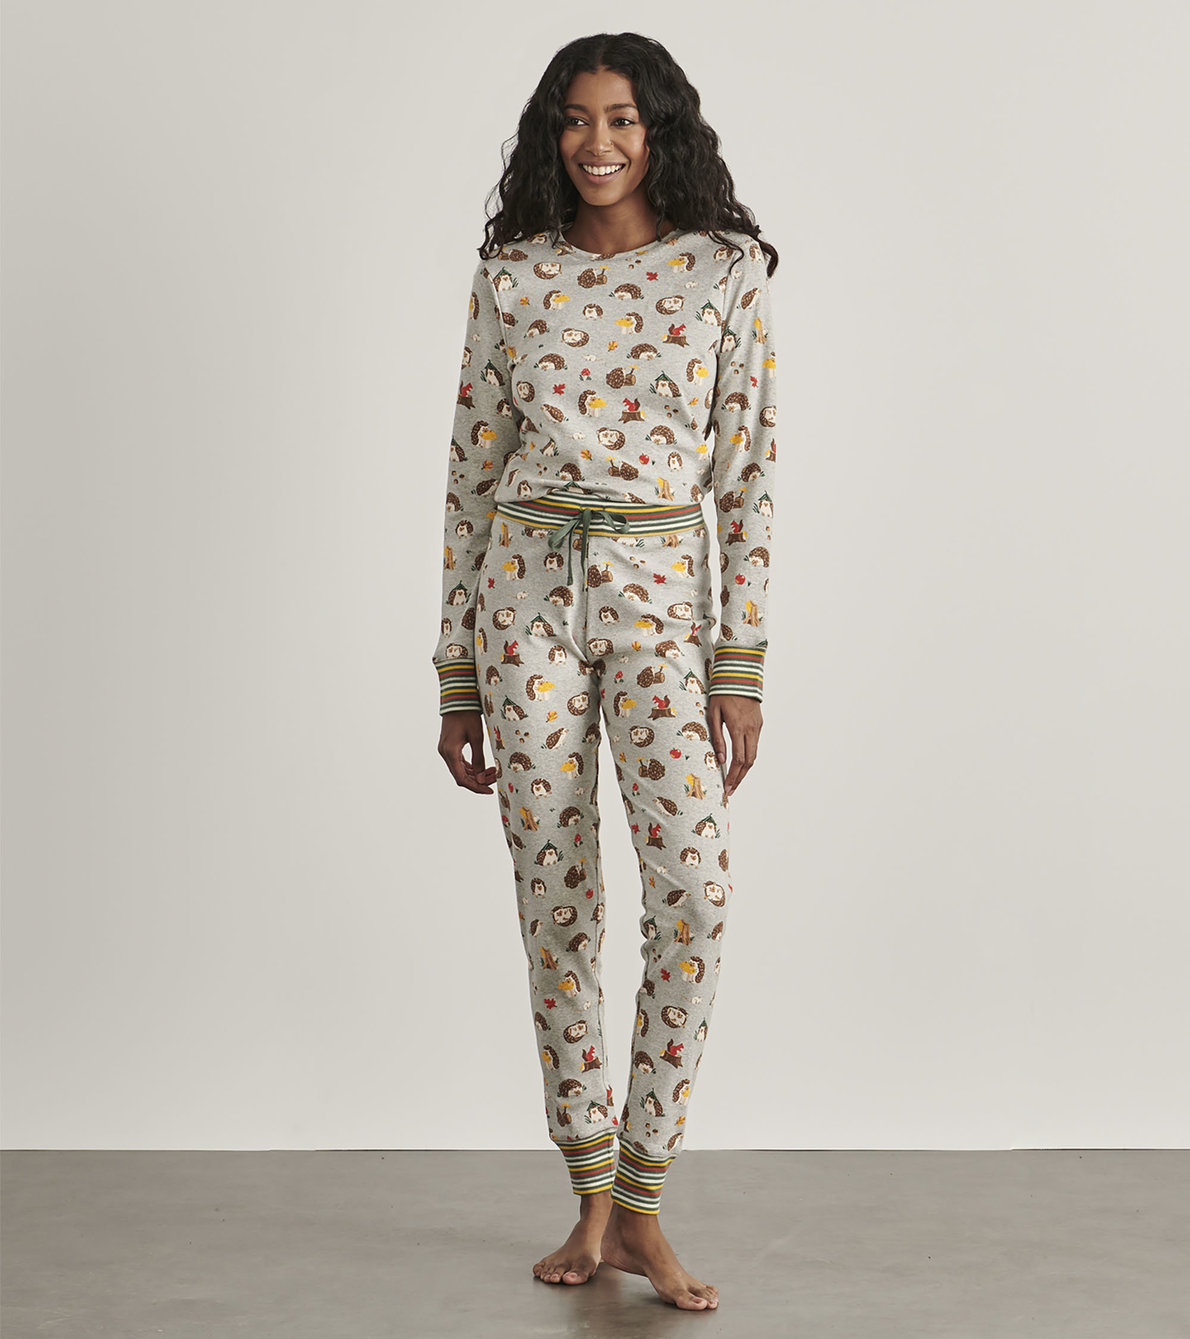 View larger image of Forest Creatures Women's Organic Cotton Pajama Set